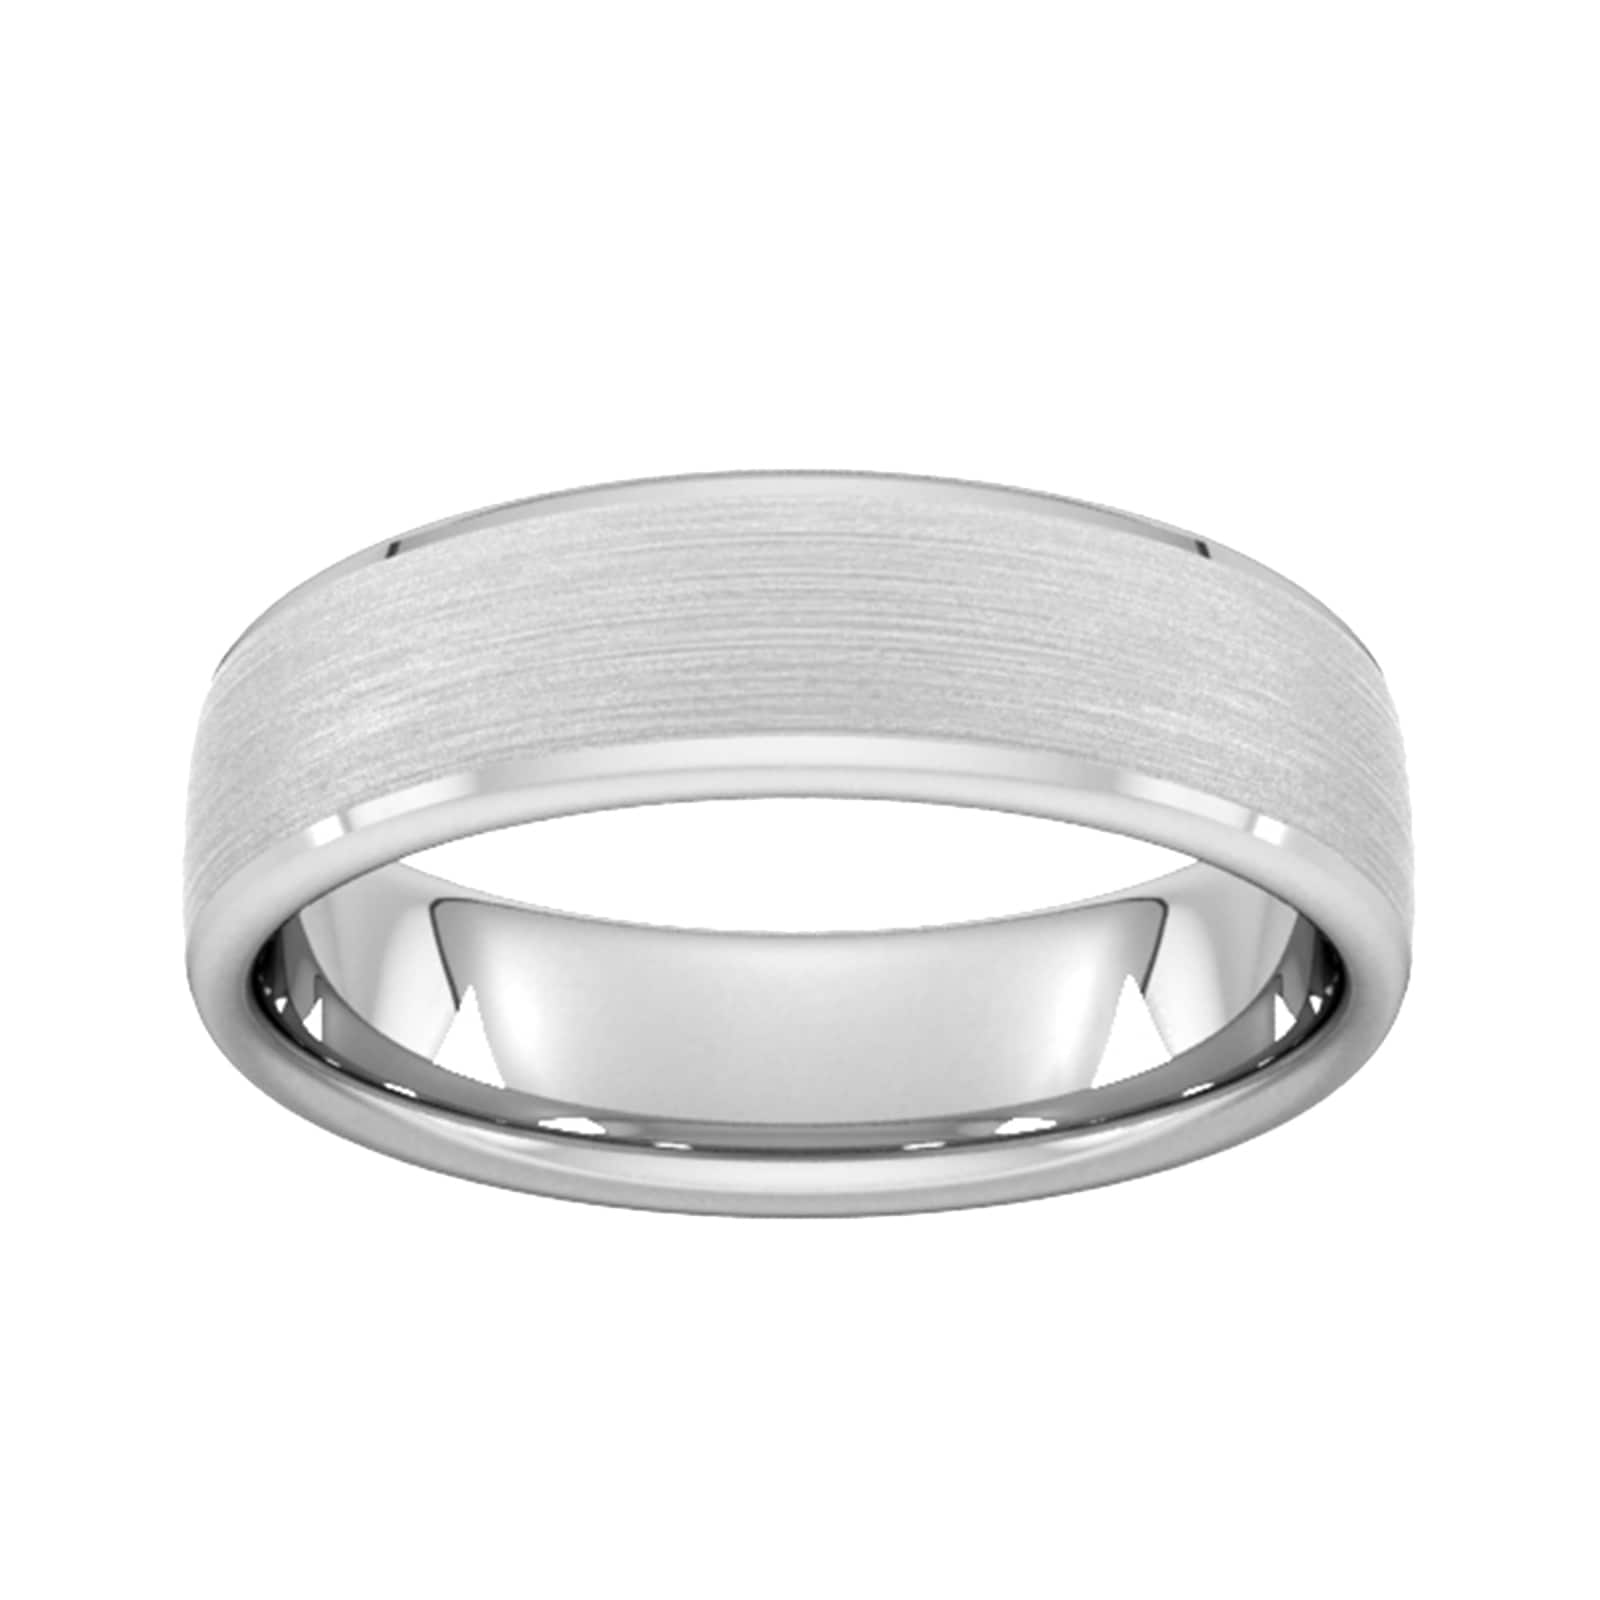 6mm Slight Court Heavy Polished Chamfered Edges With Matt Centre Wedding Ring In 9 Carat White Gold - Ring Size W